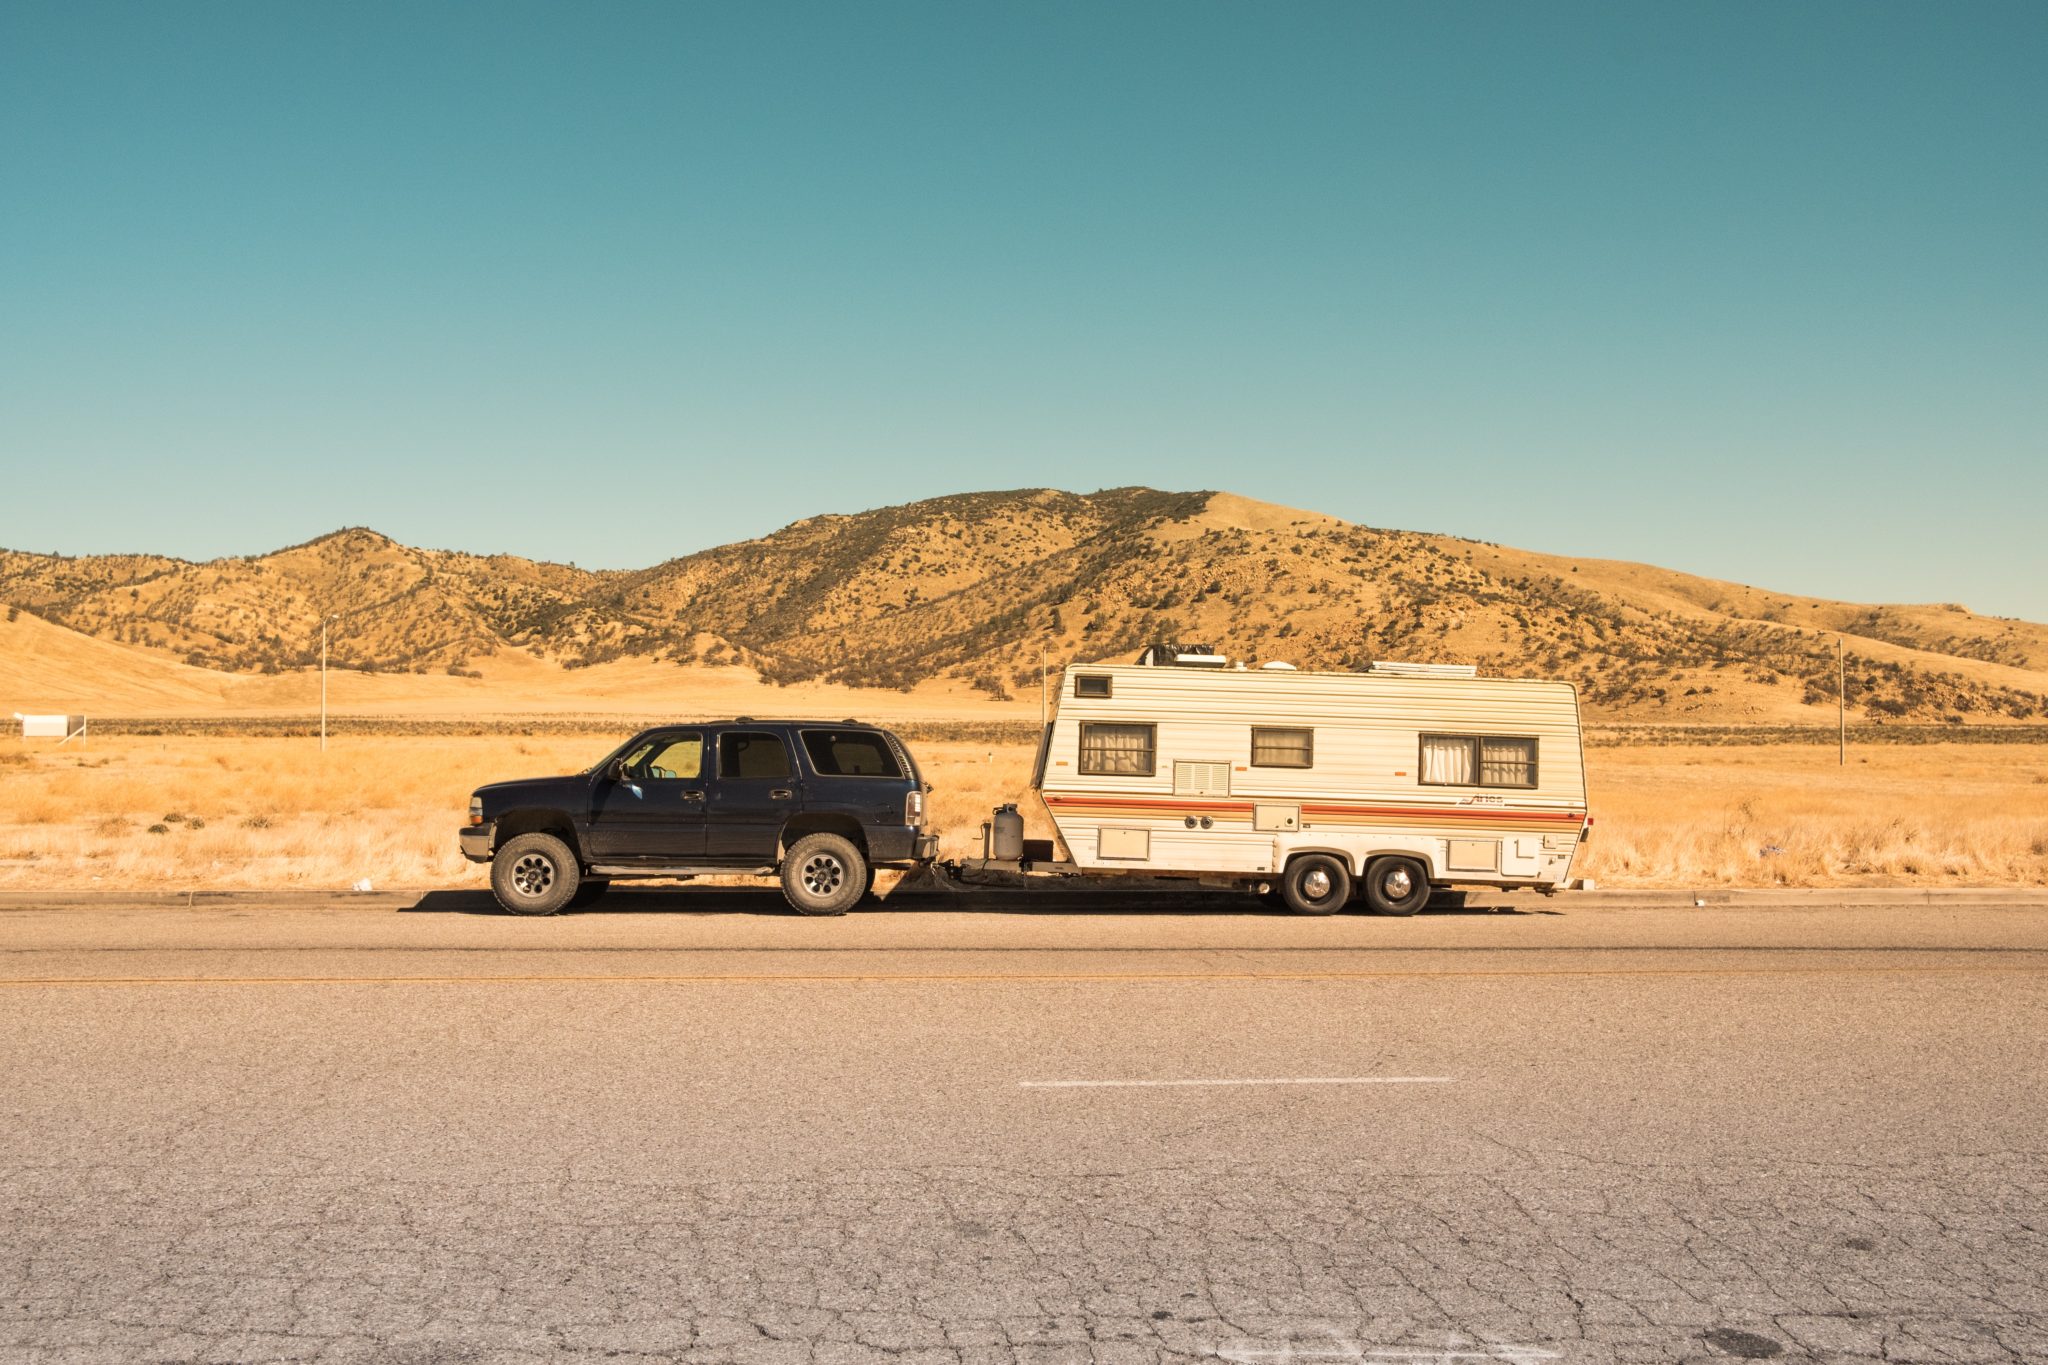 Must-Have RV Accessories